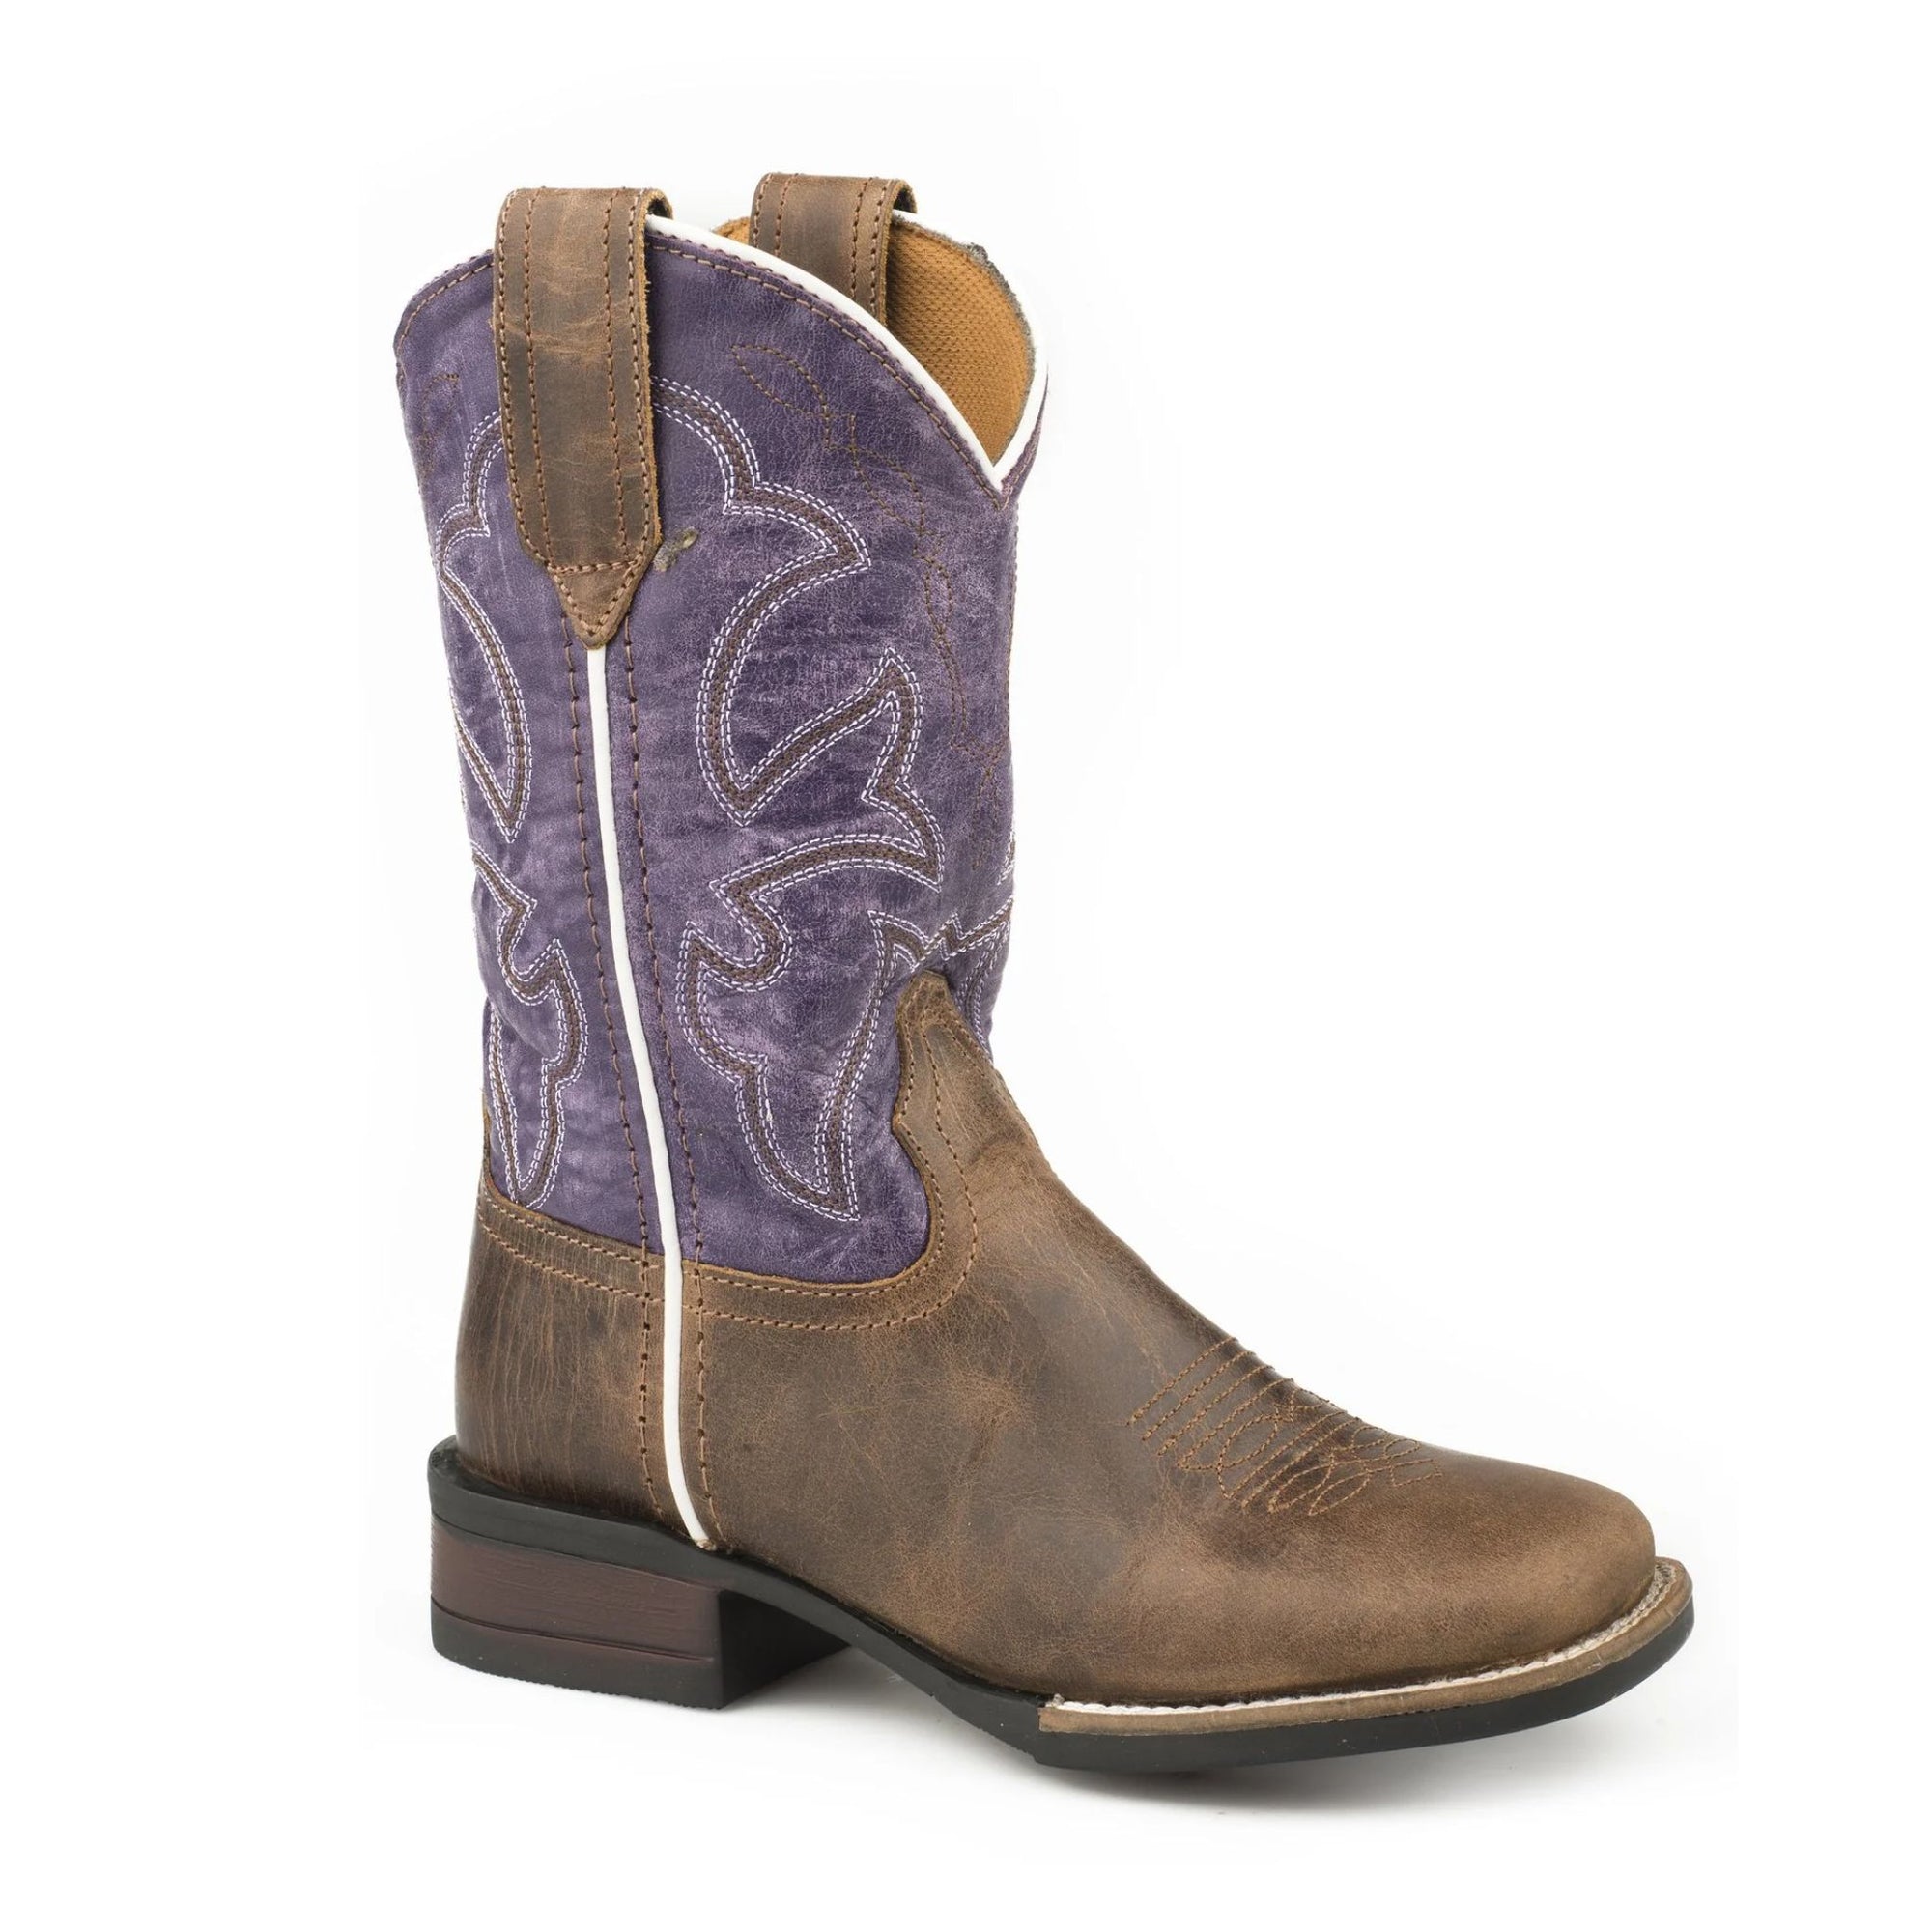 Purple and brown leather boot with purple and white embroidered detailing.